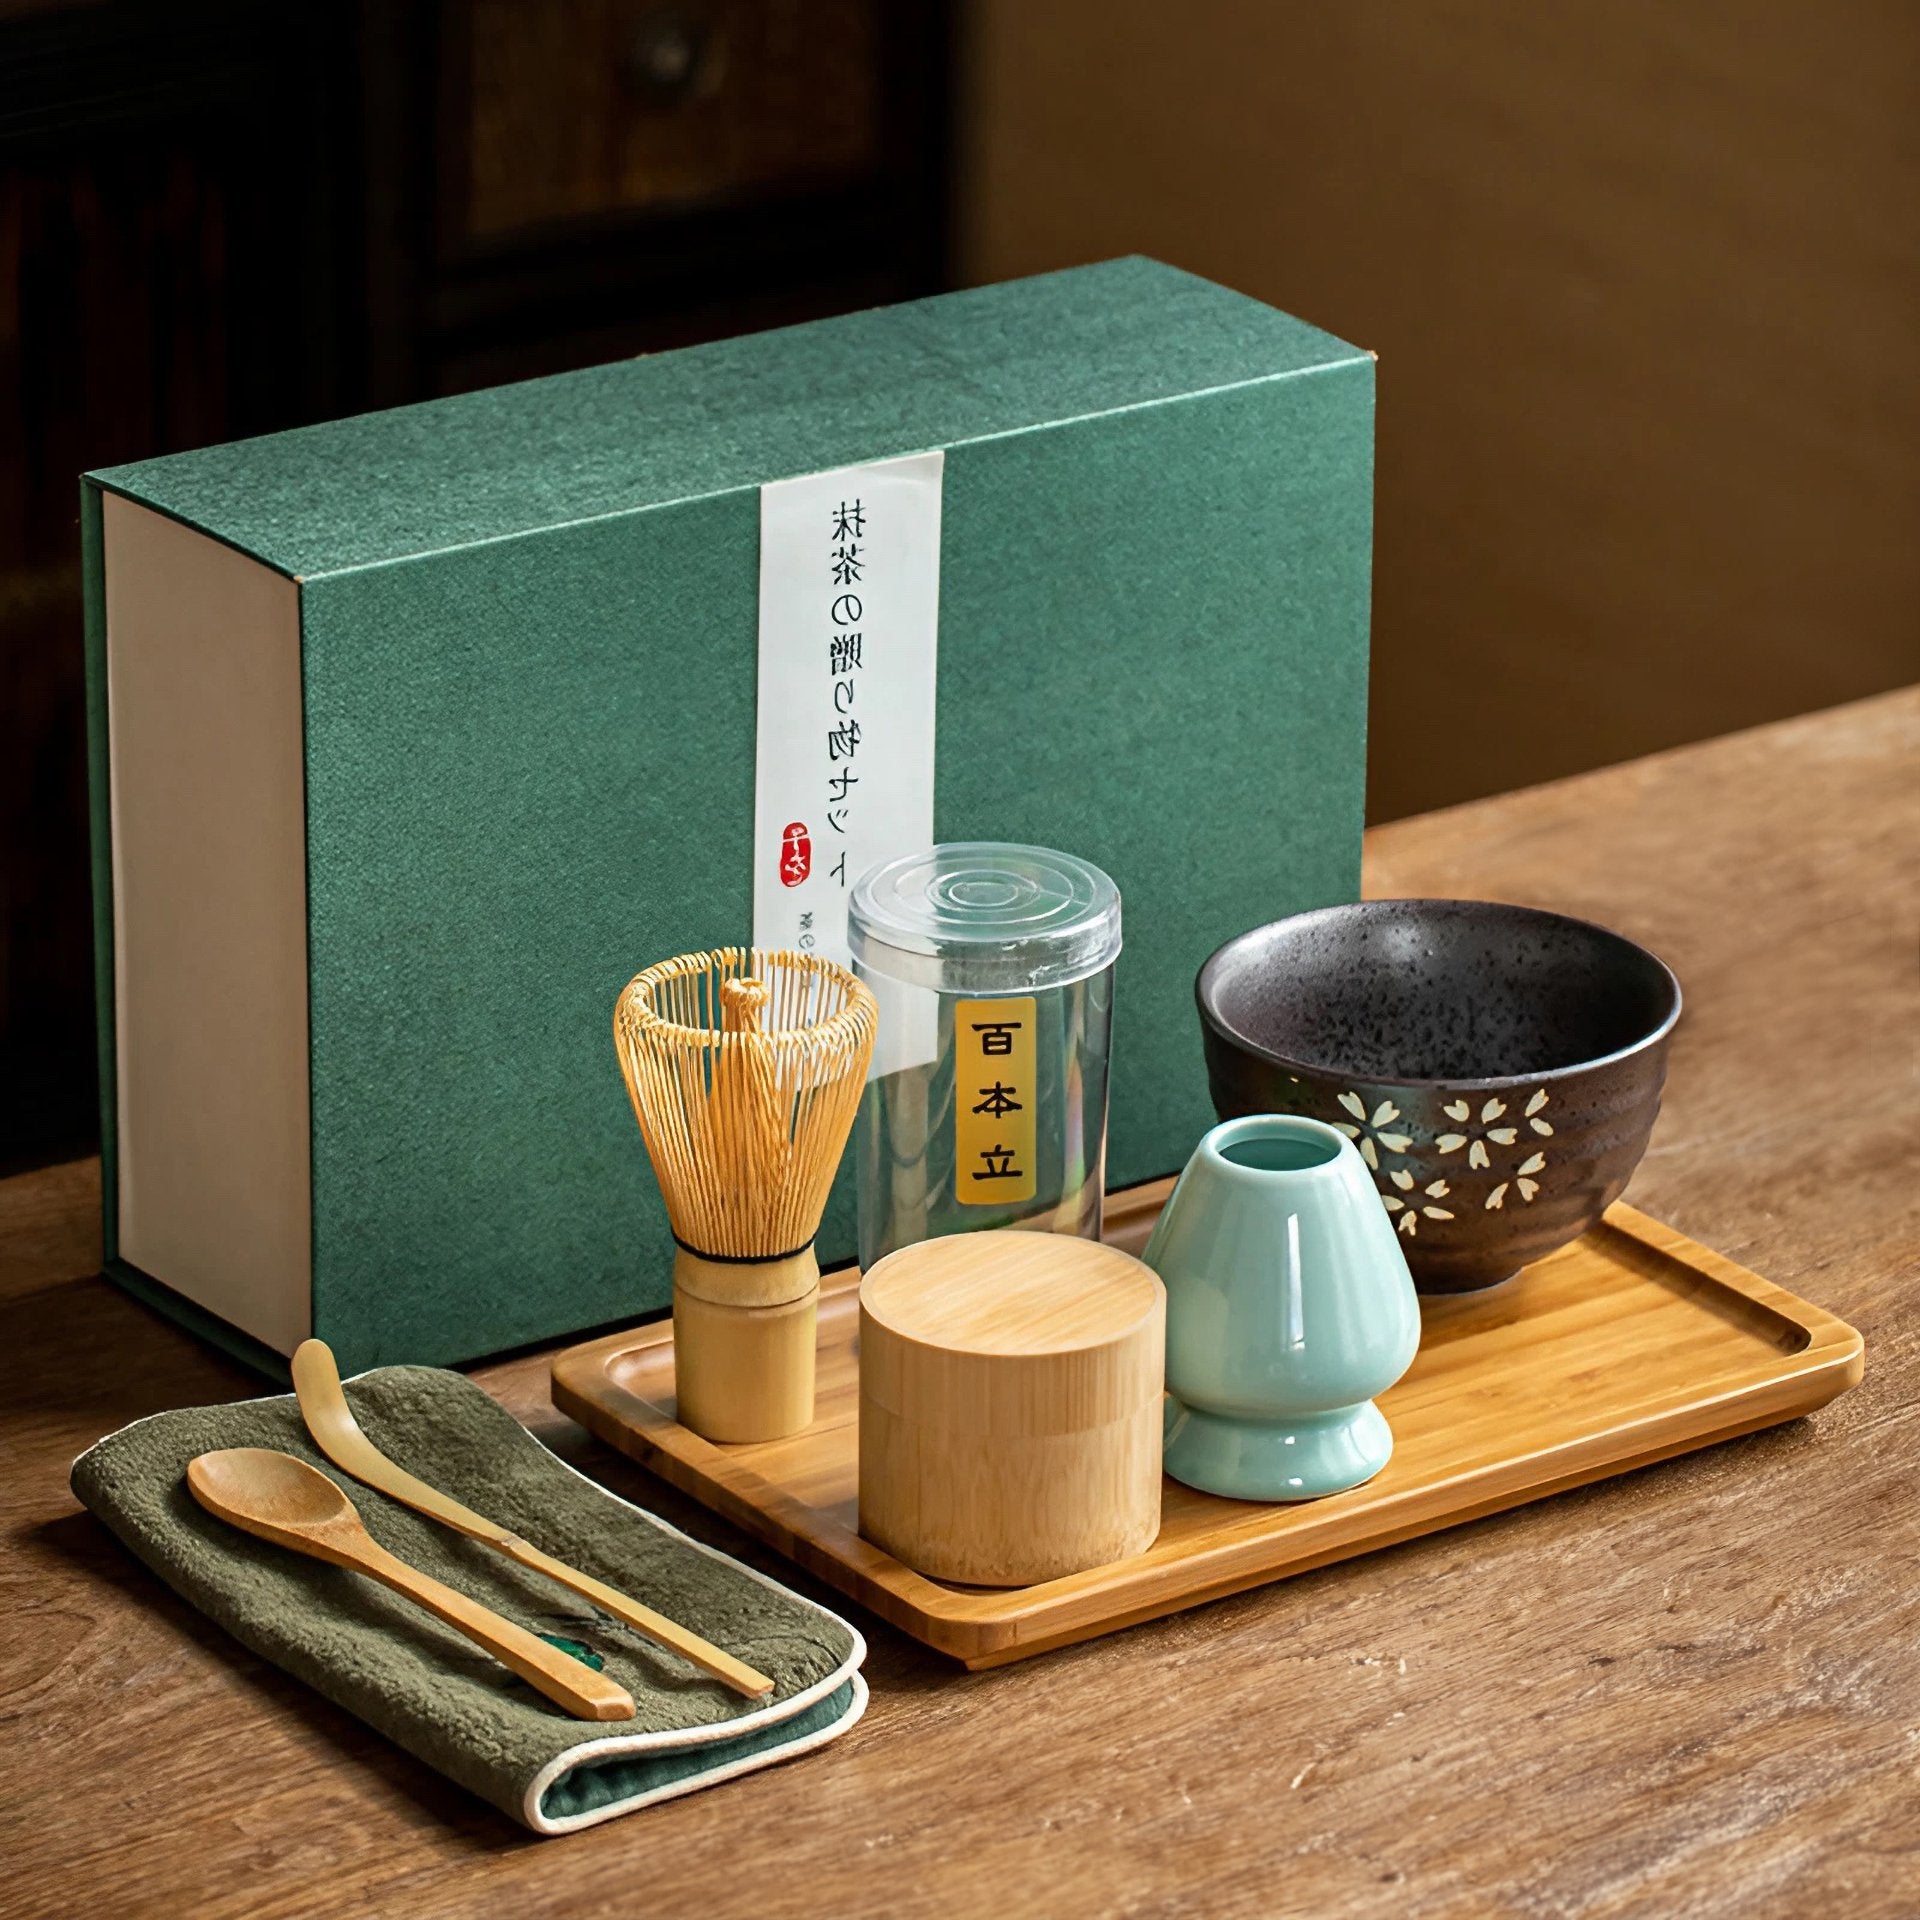 Complete Matcha tea set with a bamboo whisk, scoop, bowl, and whisk holder on a wooden tray, beside a boxed set.